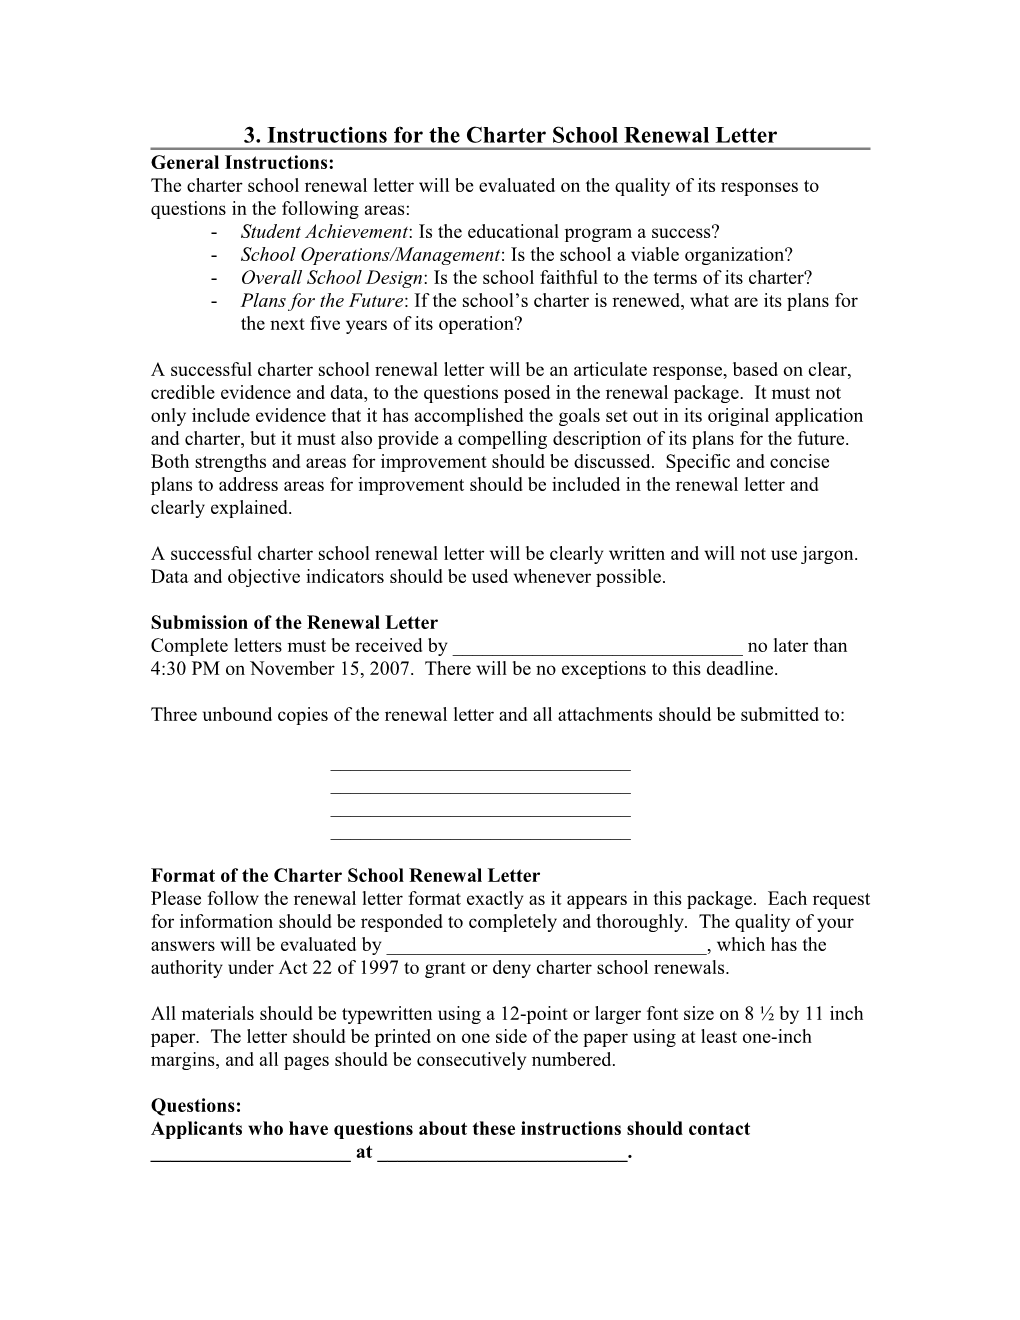 Instructions for the Charter School Renewal Letter